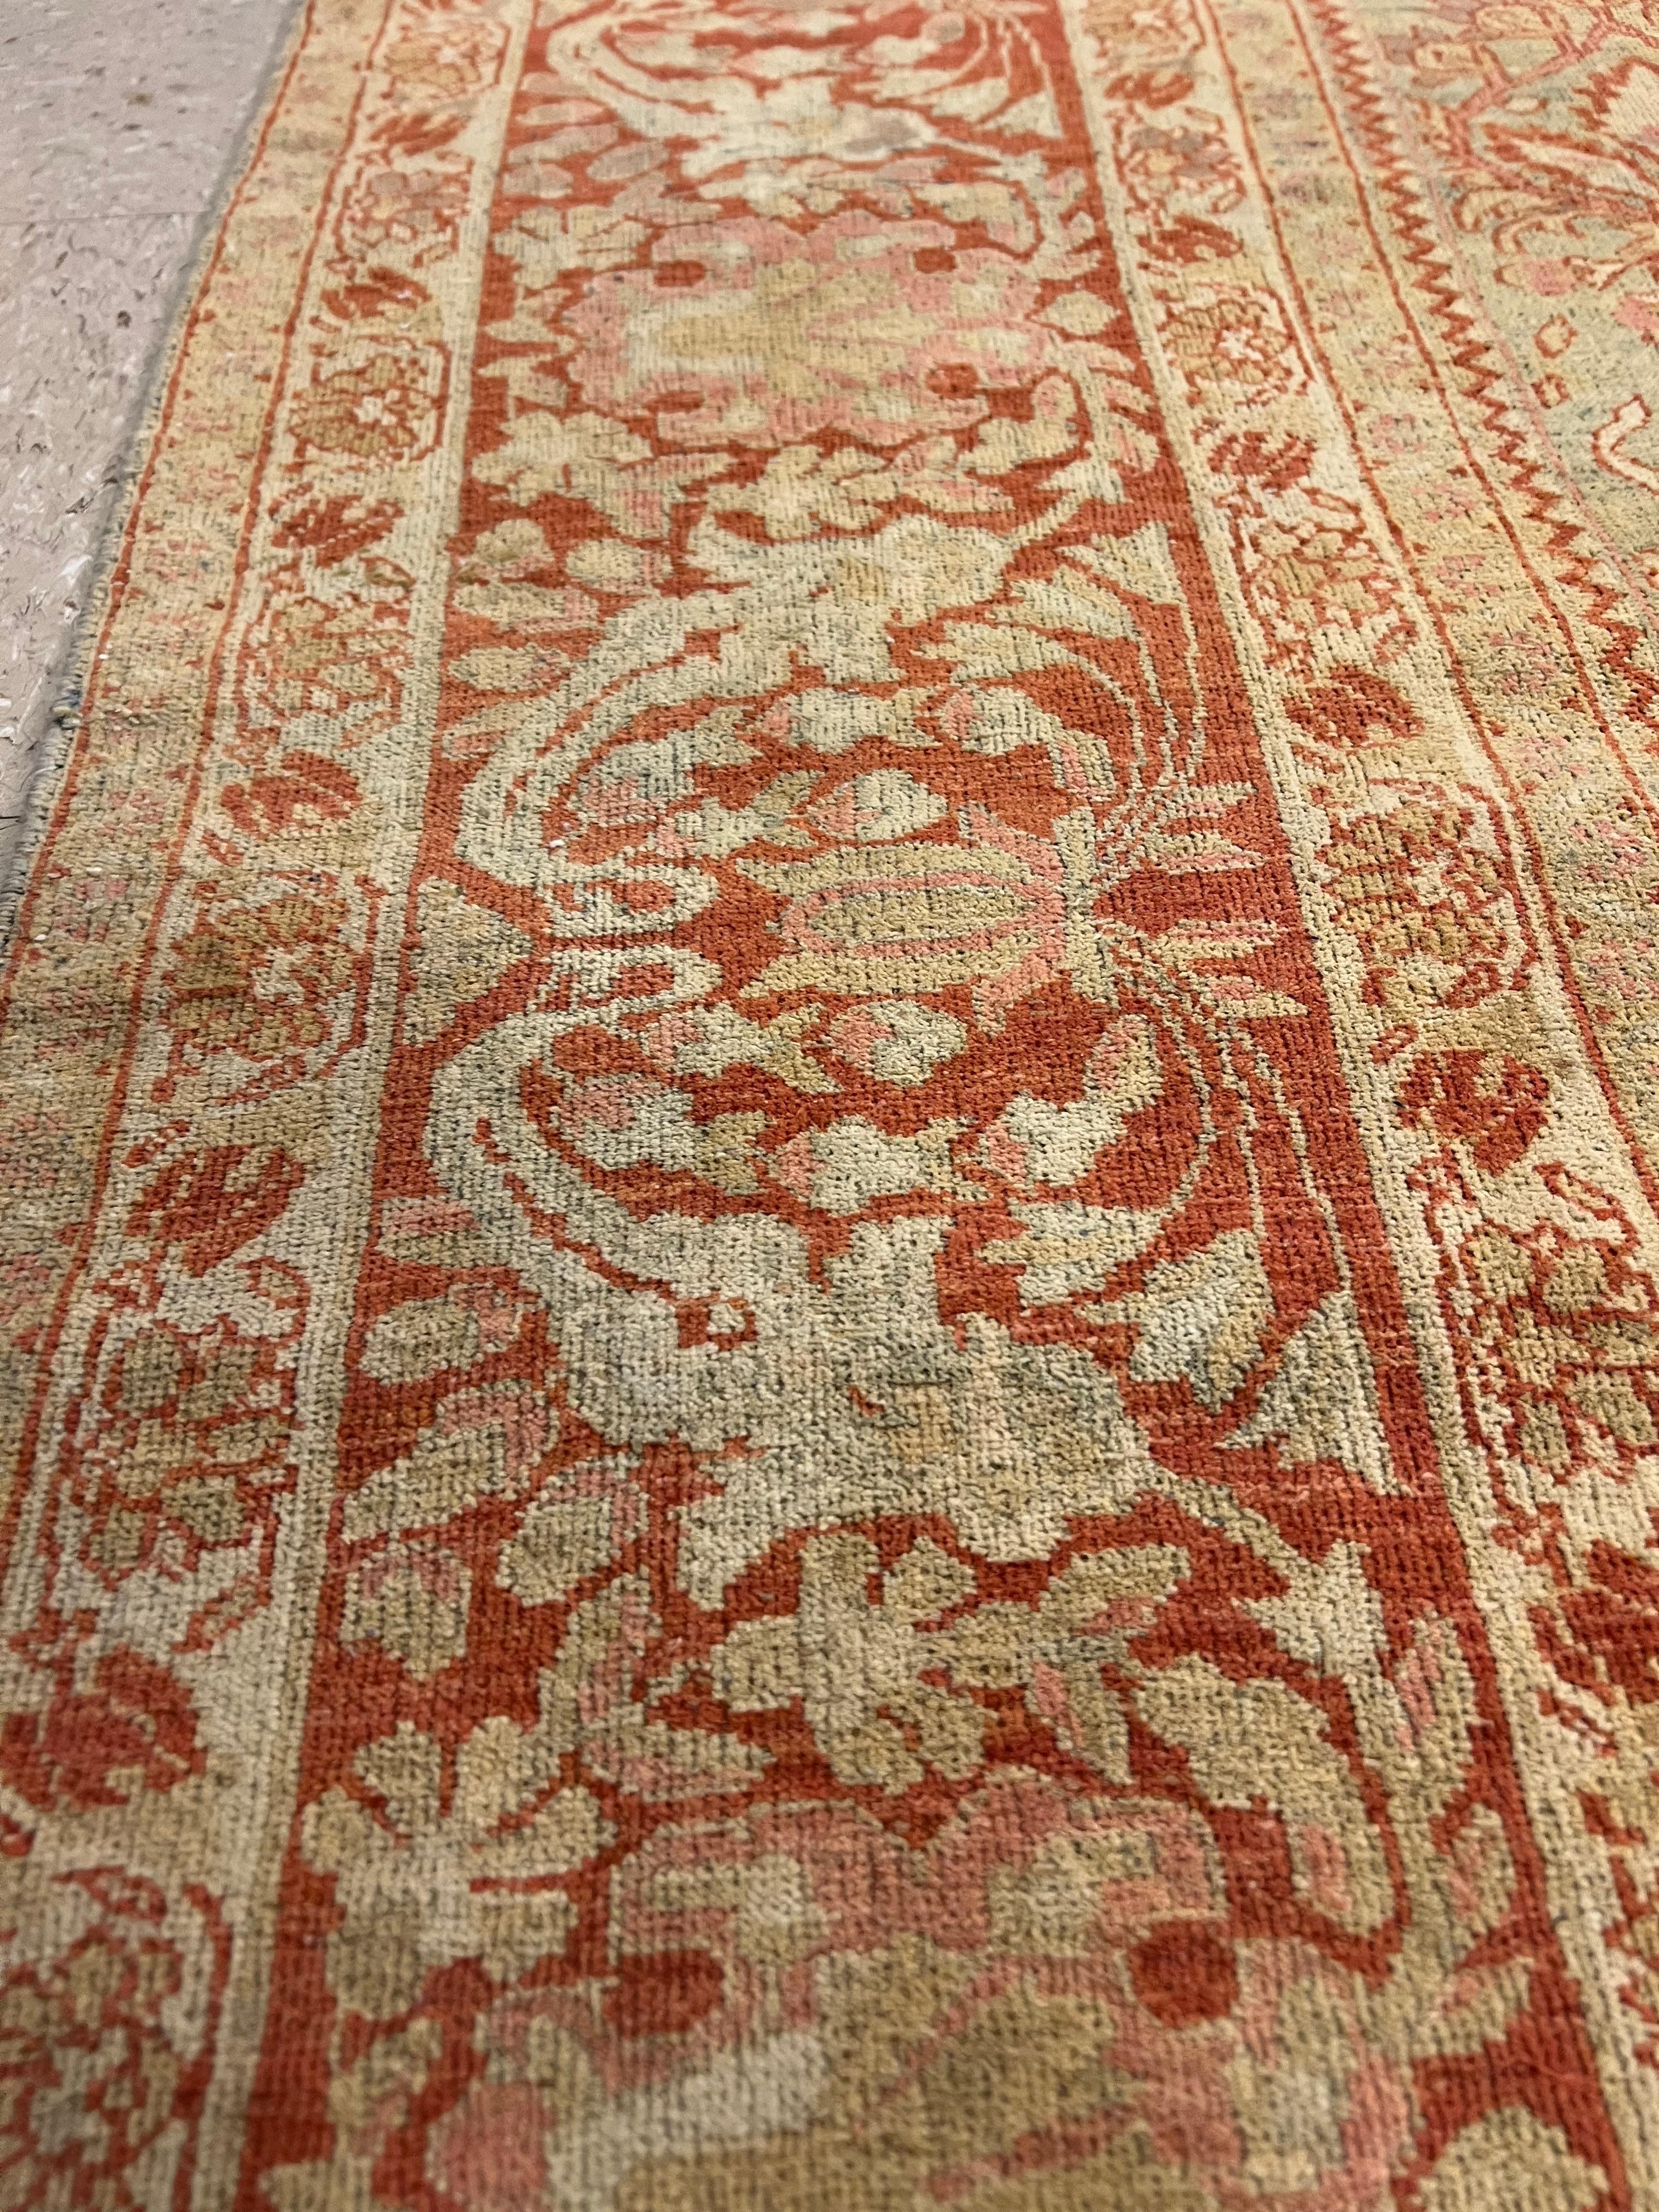 Yellow and Orange Antique Mahal Rug, Handmade Oriental Rug  In Good Condition For Sale In Port Washington, NY